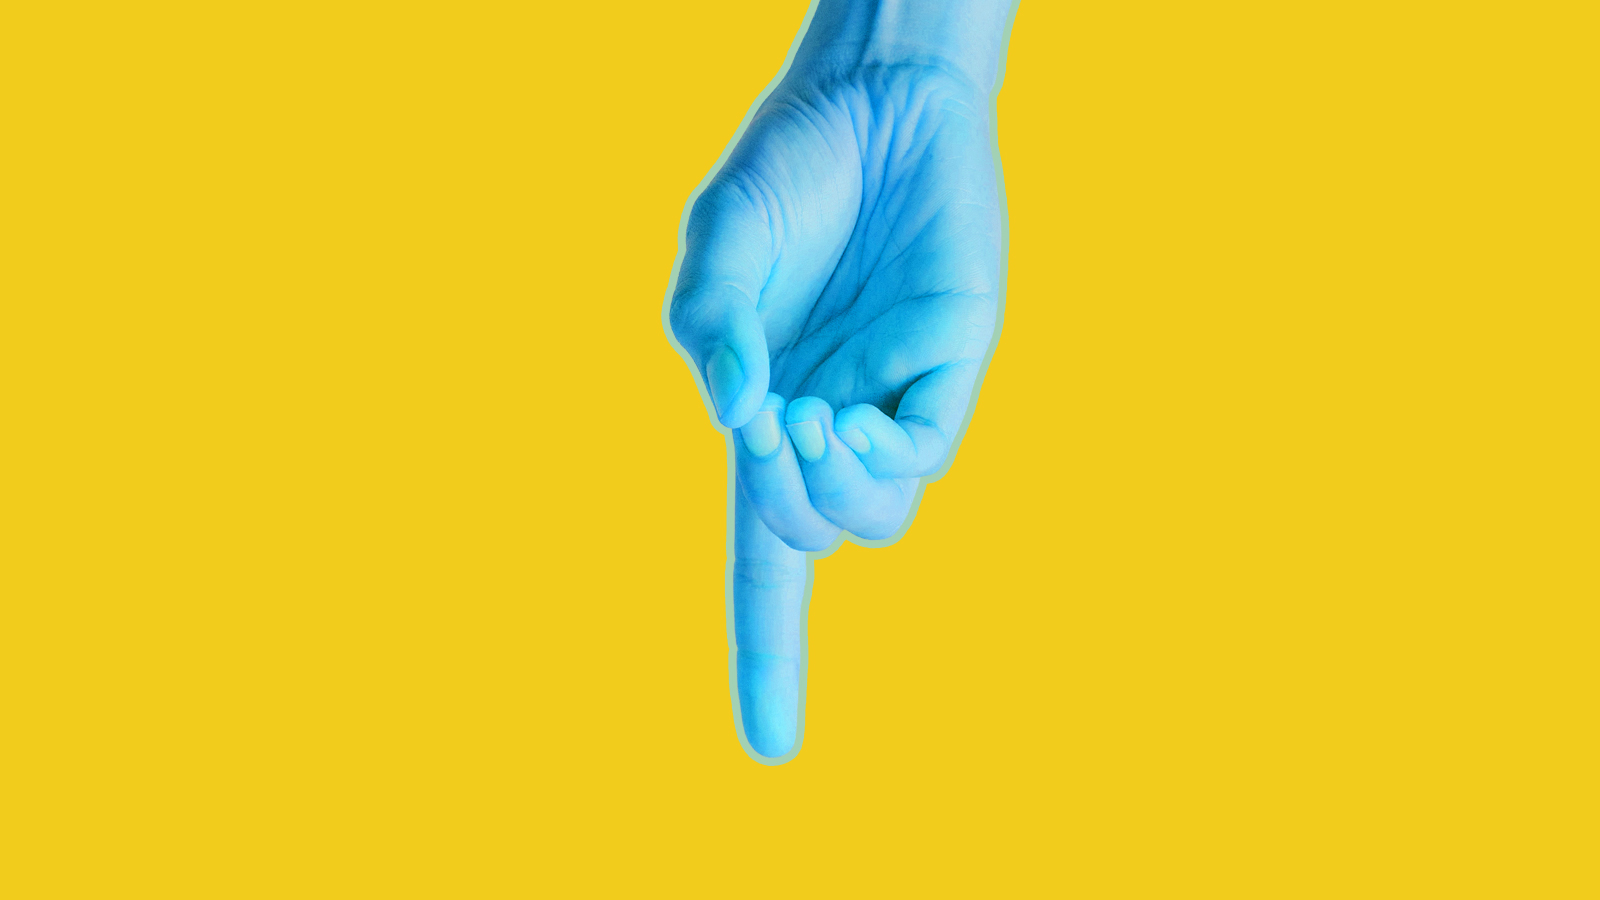 giant blue hand with index finger pointing down on yellow background